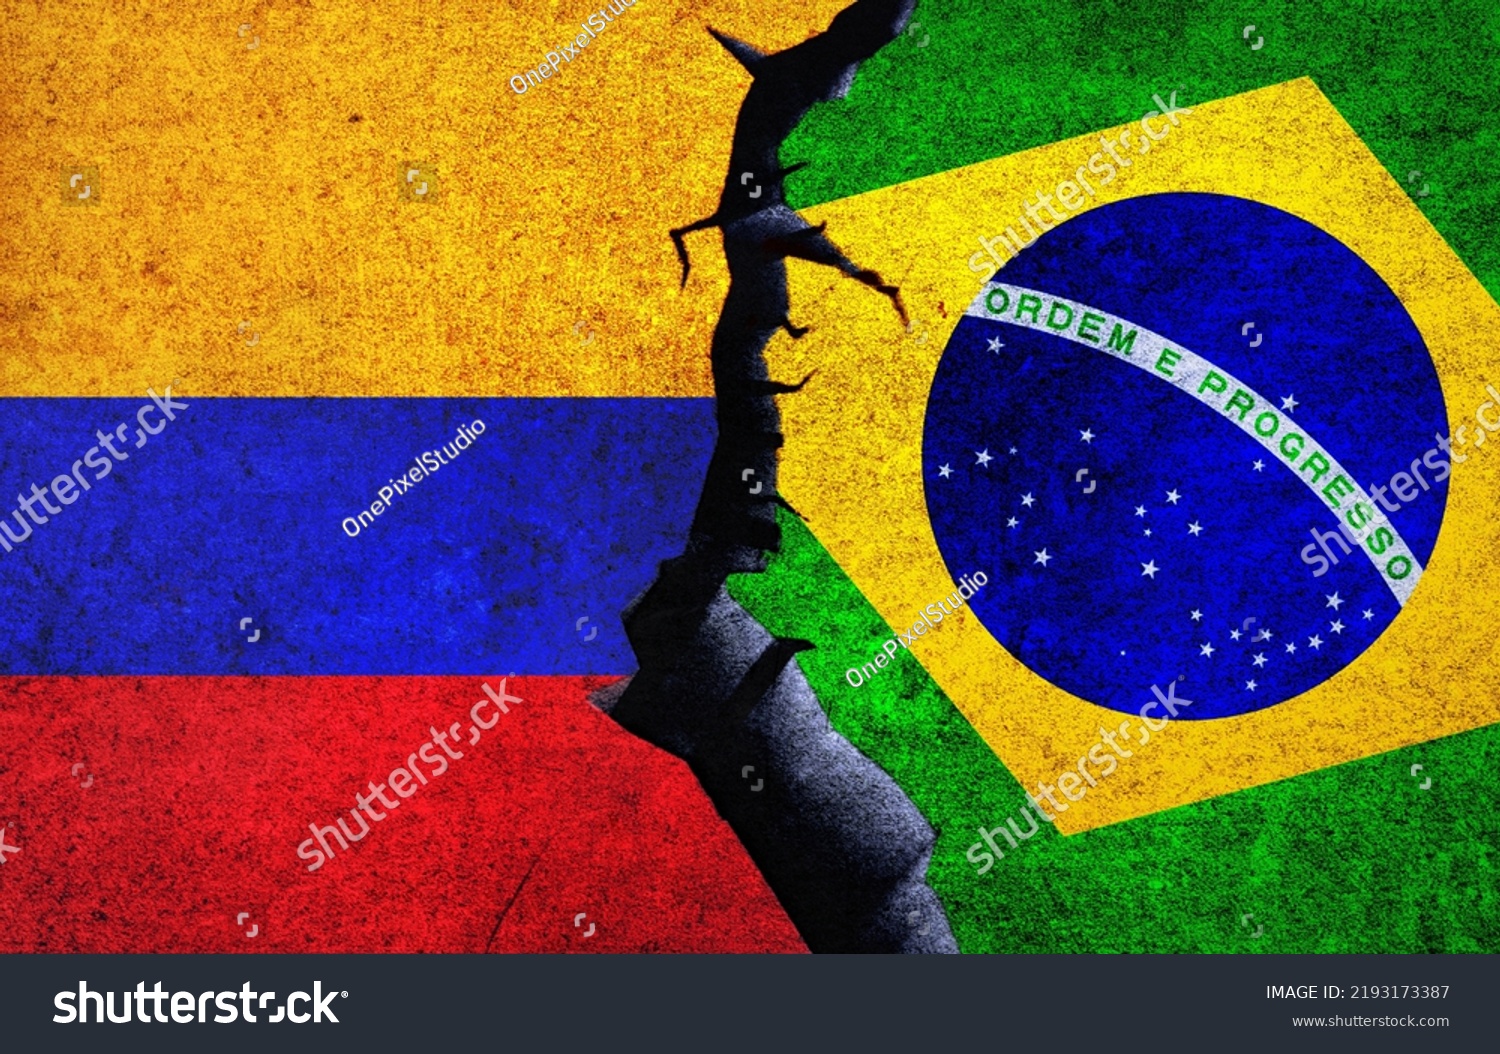 Brazil Vs Colombia Concept Flags On Stock Illustration 2193173387